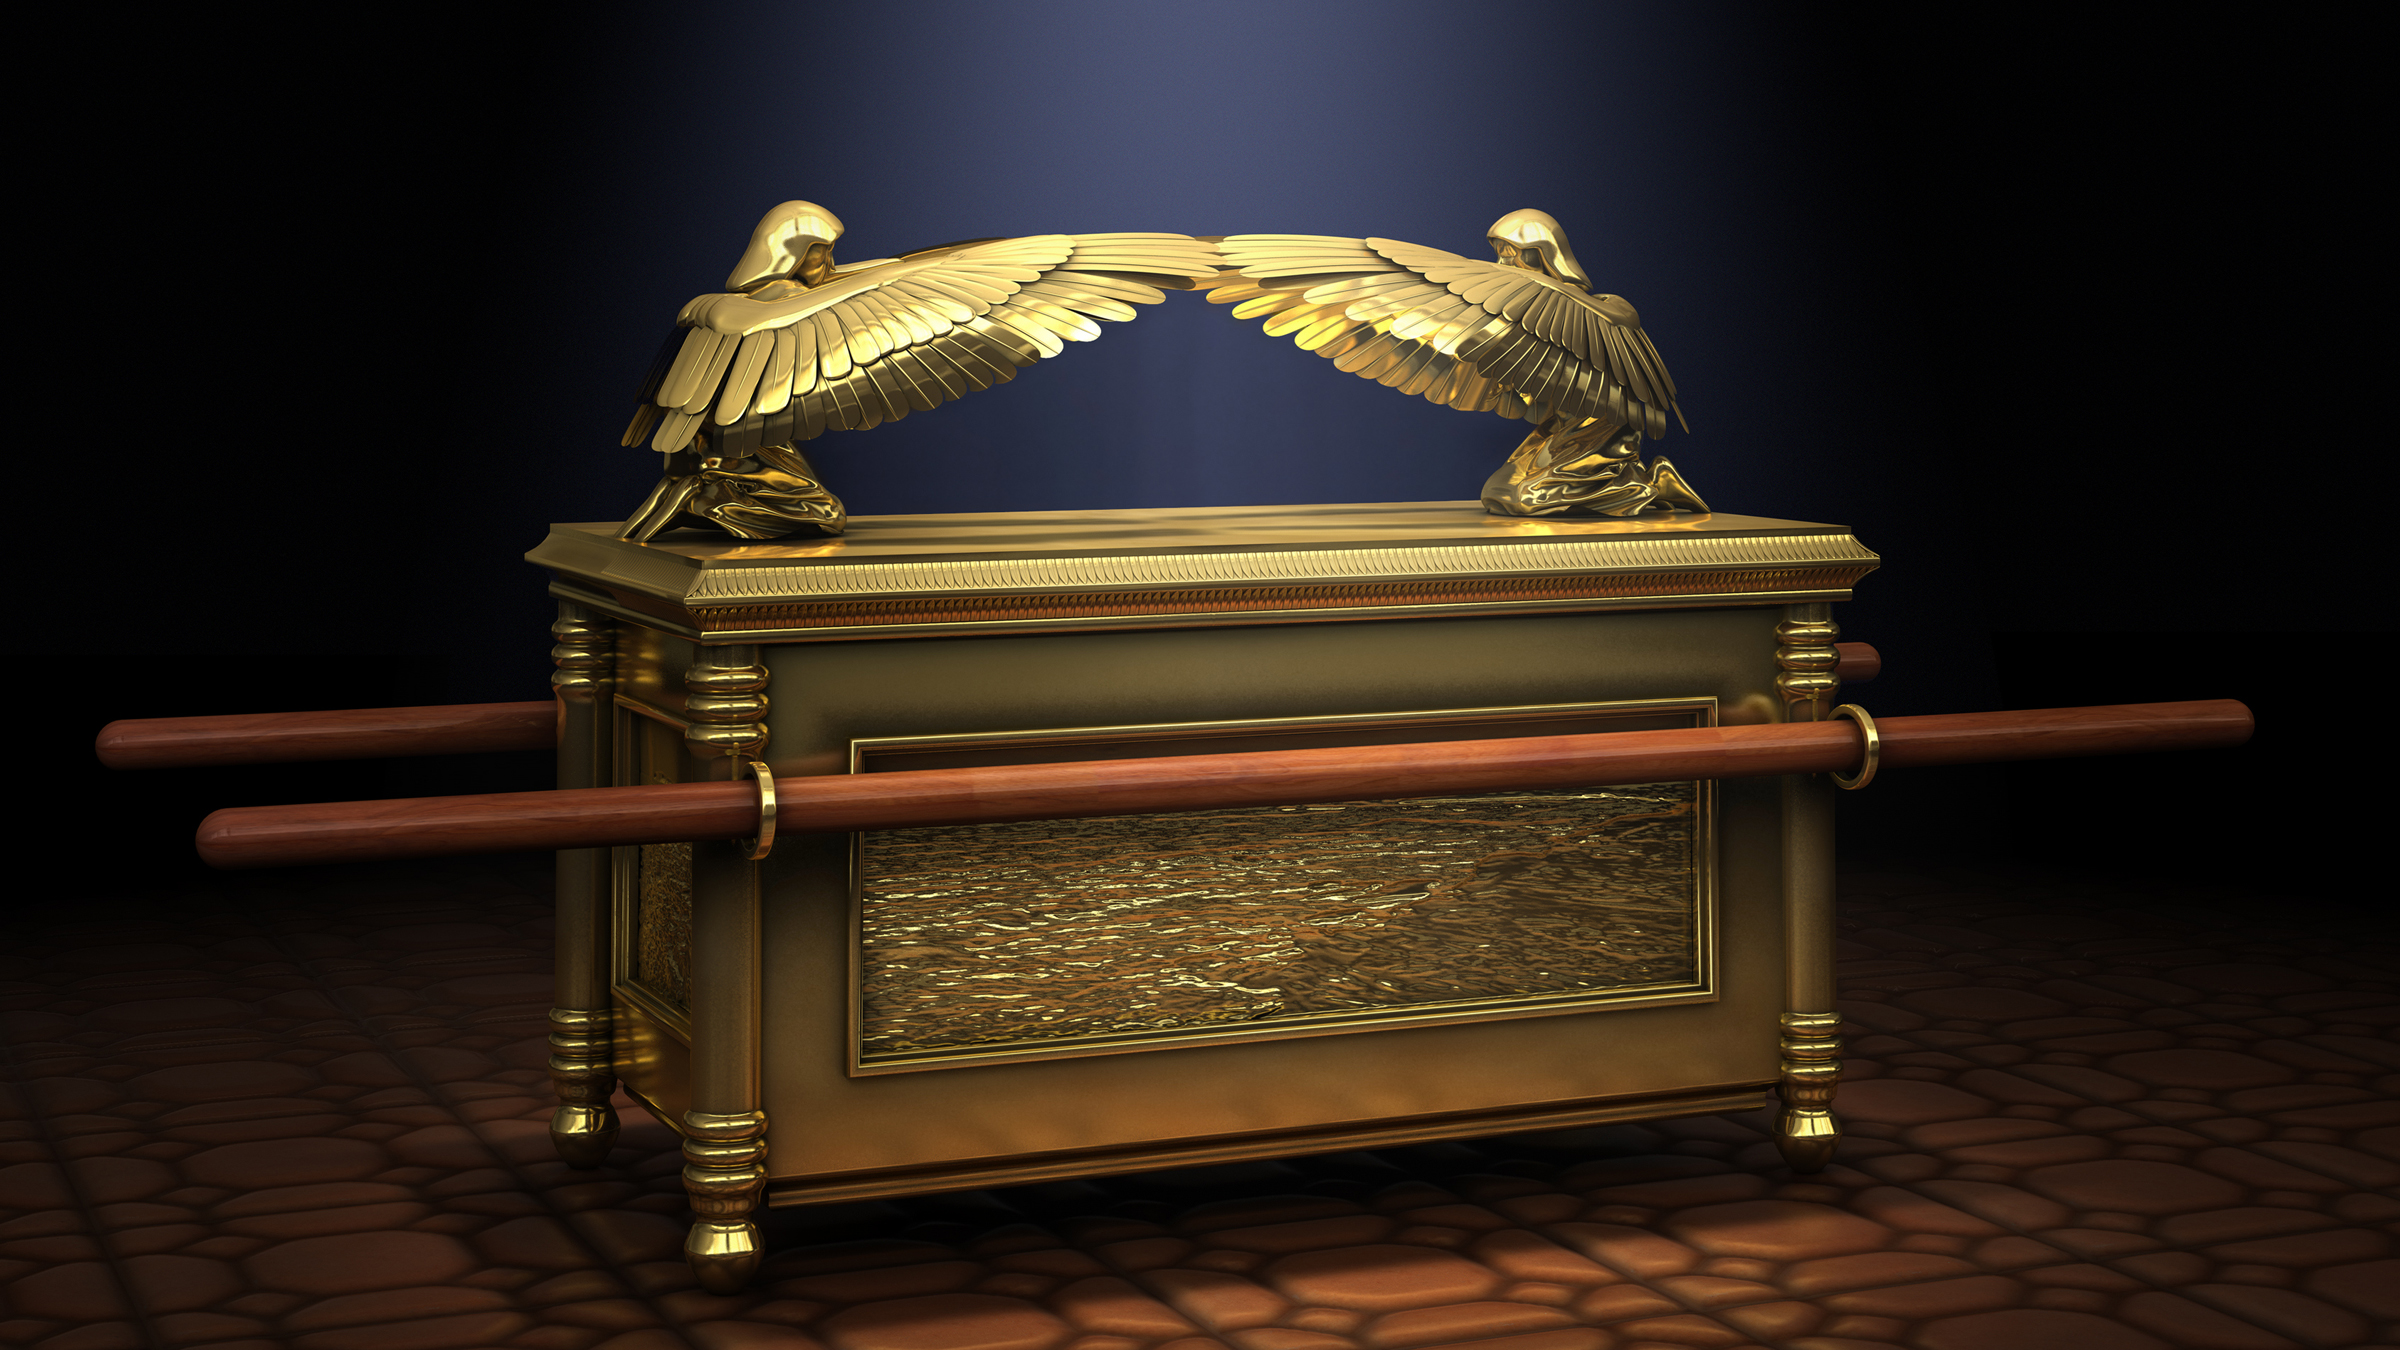 A digital rendering of the Ark of the Covenant.